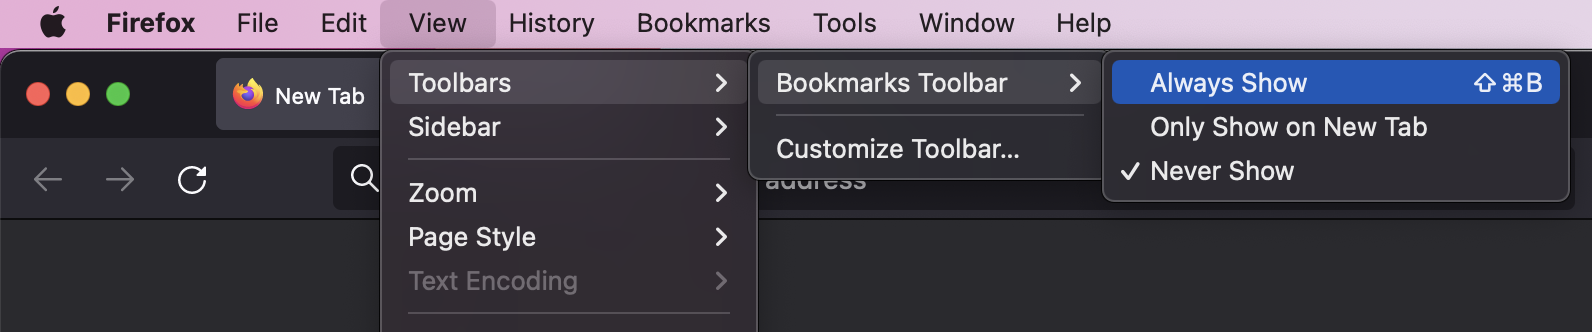 Firefox browser screenshot with the Bookmarks Tool enabled from the View menu